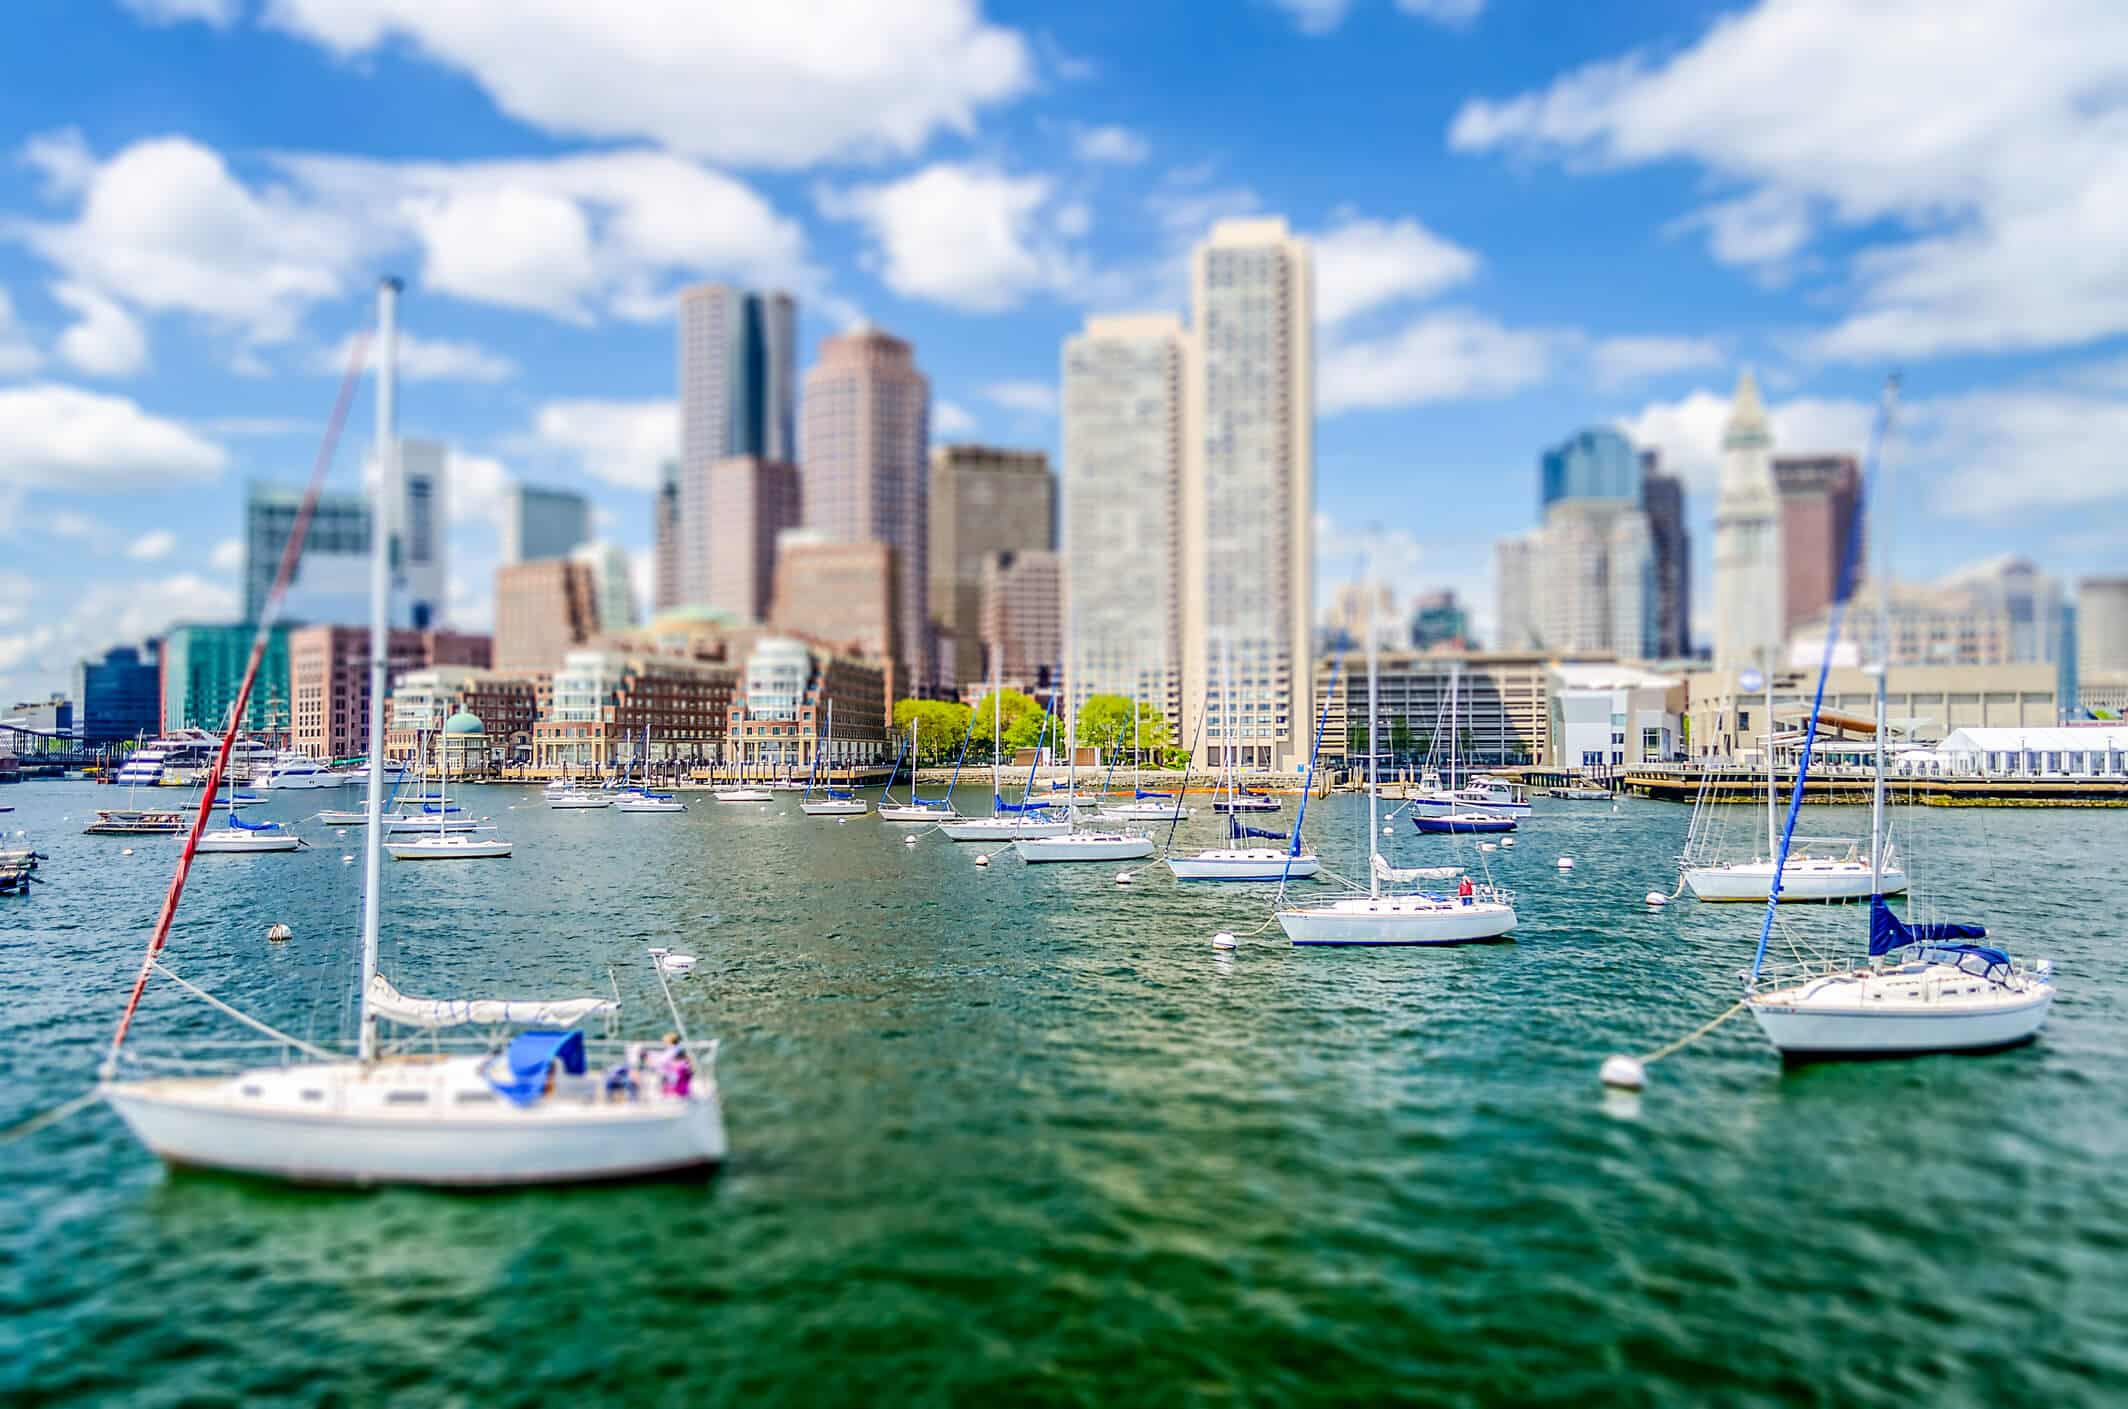 Boats floating in the Boston bay with view of the city skyline.